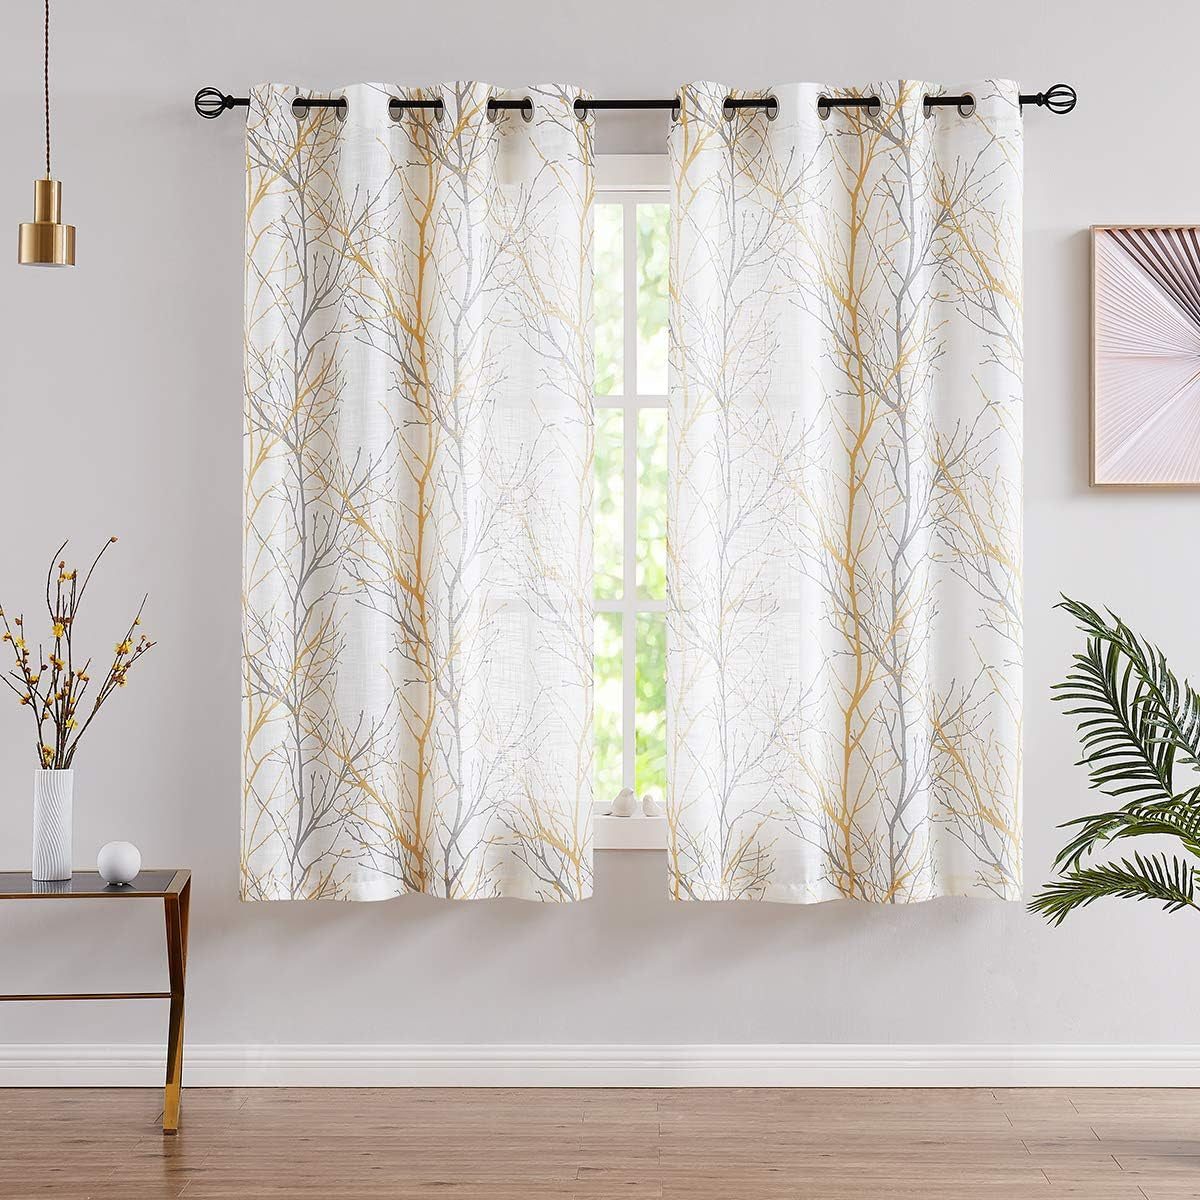 FMFUNCTEX Blue White Curtains for Kitchen Living Room 72“ Grey Tree Branches Print Curtain Set for Small Windows Linen Textured Semi-Sheer Drapes for Bedroom Grommet Top, 2 Panels  Fmfunctex Yellow 50" X 45" |2Pcs 